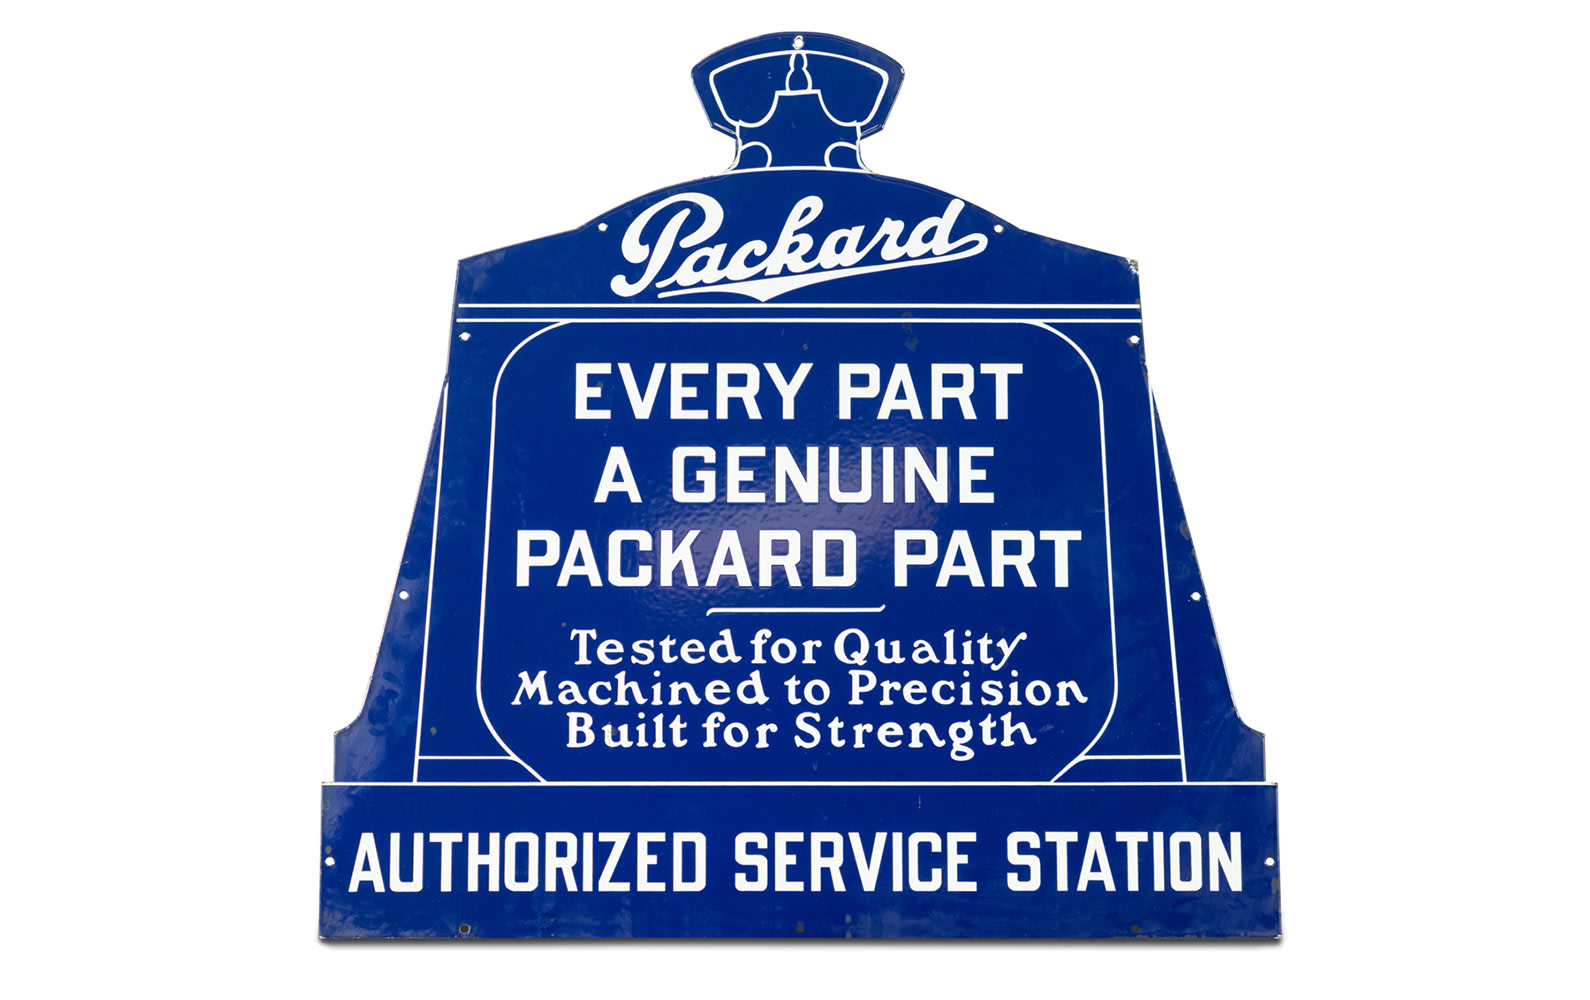 Packard Authorized Service Station Sign